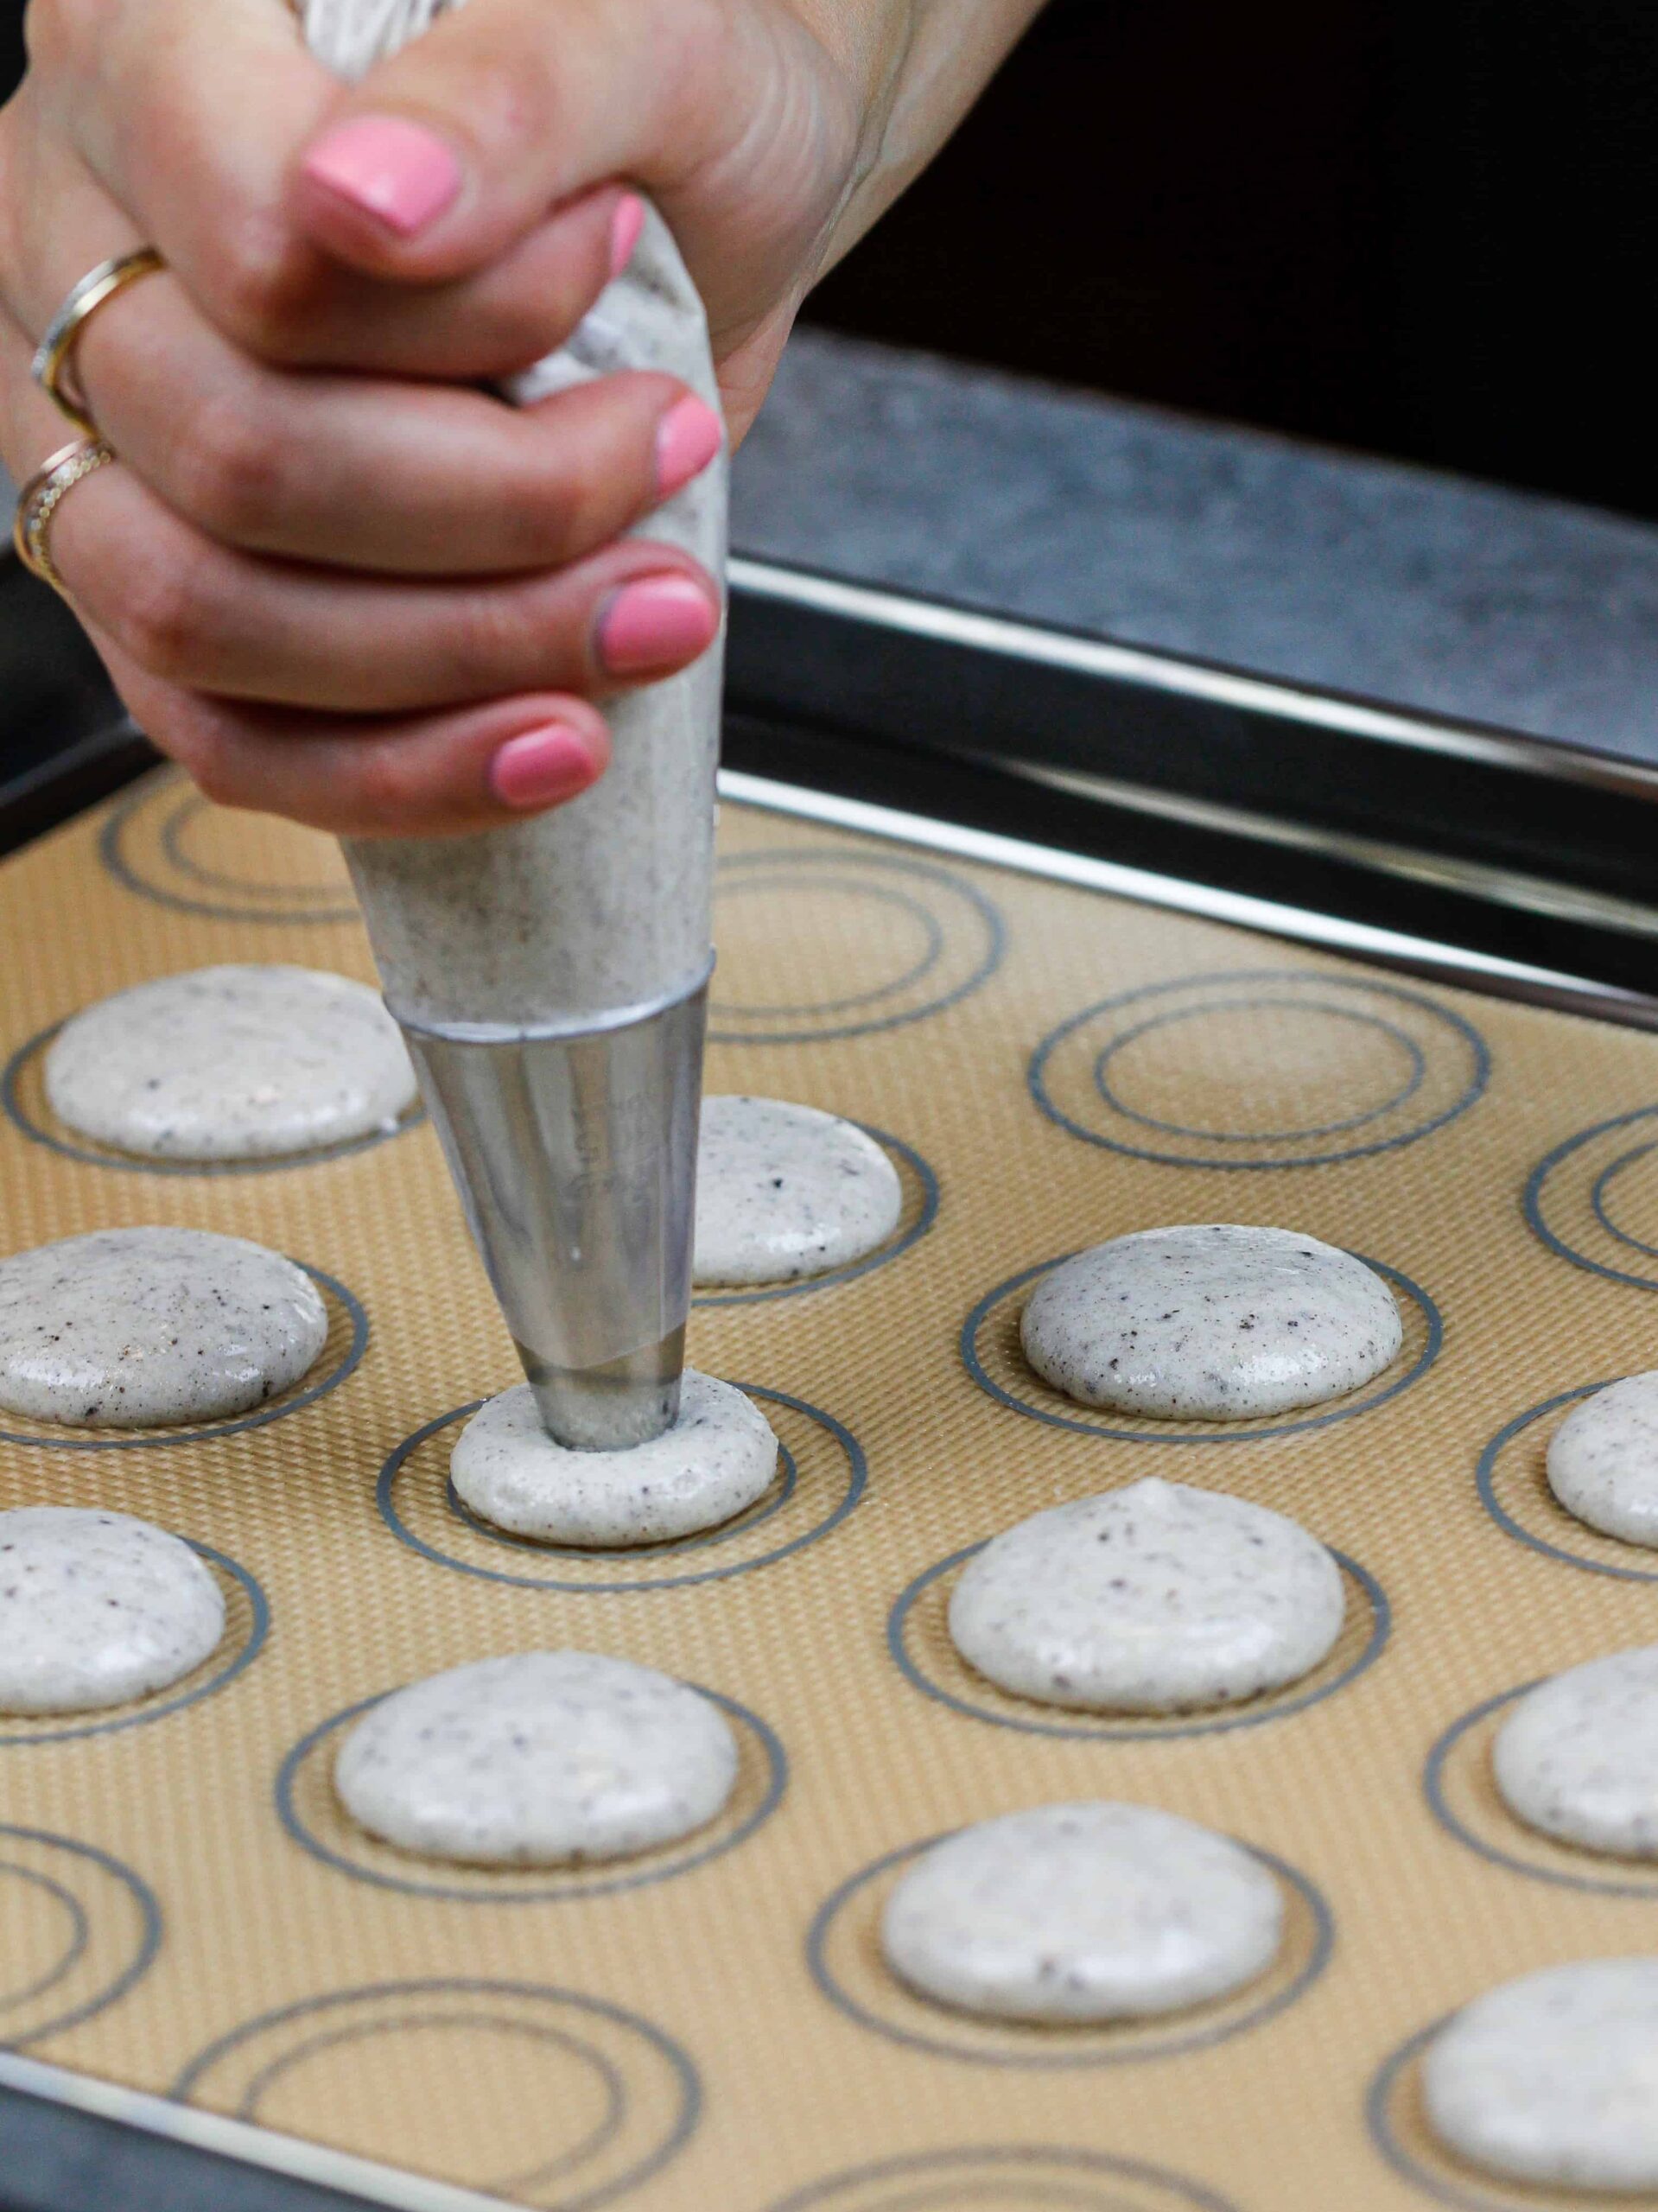 image of french cookies and cream macarons being piped onto a silpat mat